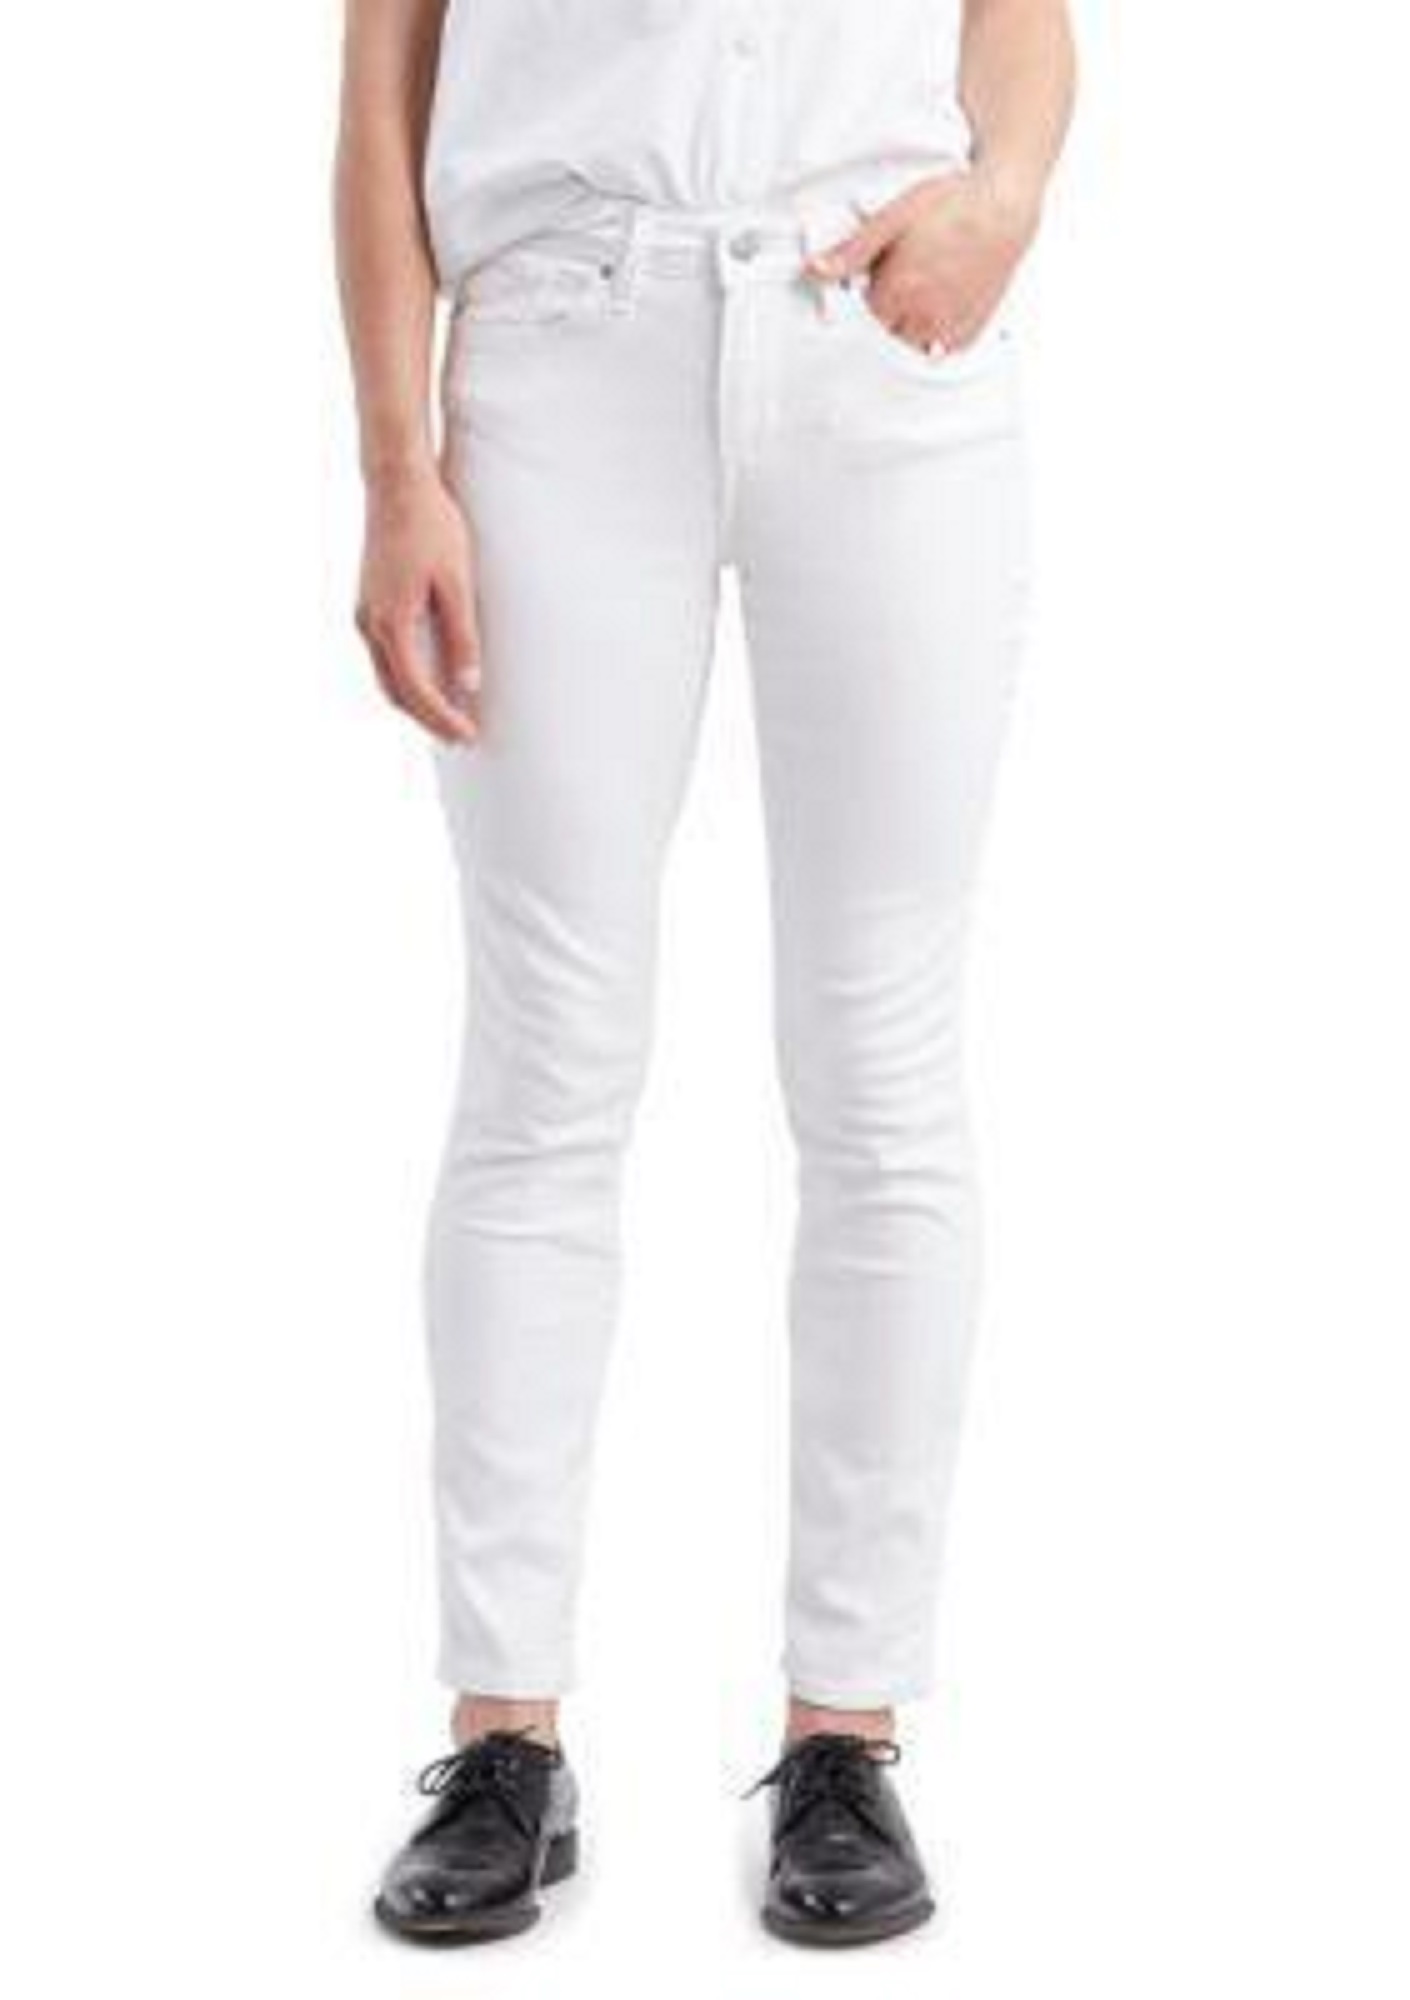 Levi's Women's Classic Modern Mid Rise Skinny Jeans Natural Size 10